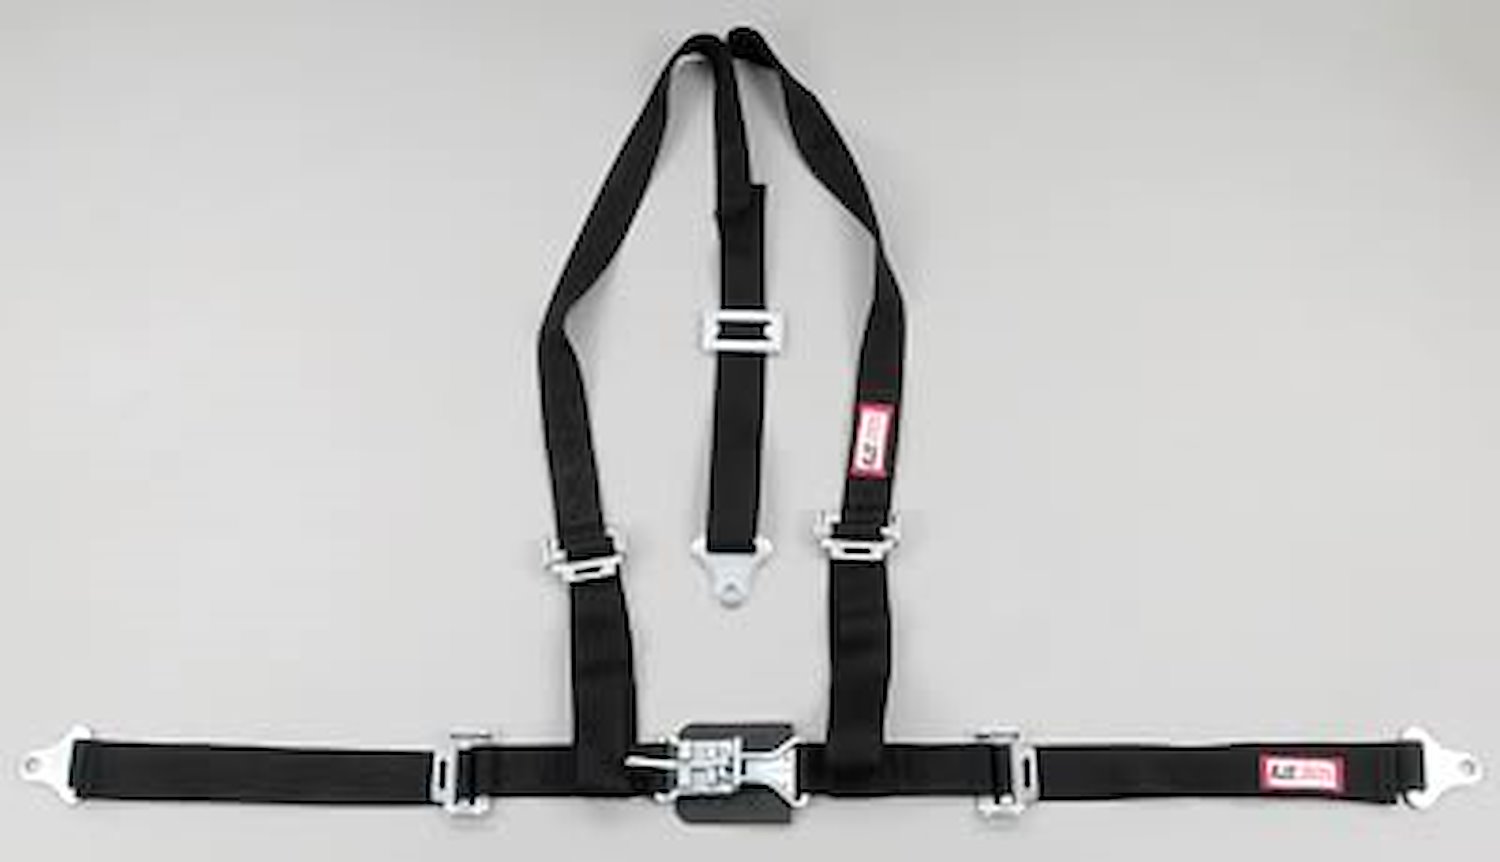 NON-SFI L&L HARNESS 3 PULL DOWN Lap Belt w/adjuster 2 S.H. Individual FLOOR Mount w/STERNUM STRAP ALL WRAP ENDS HOT PINK